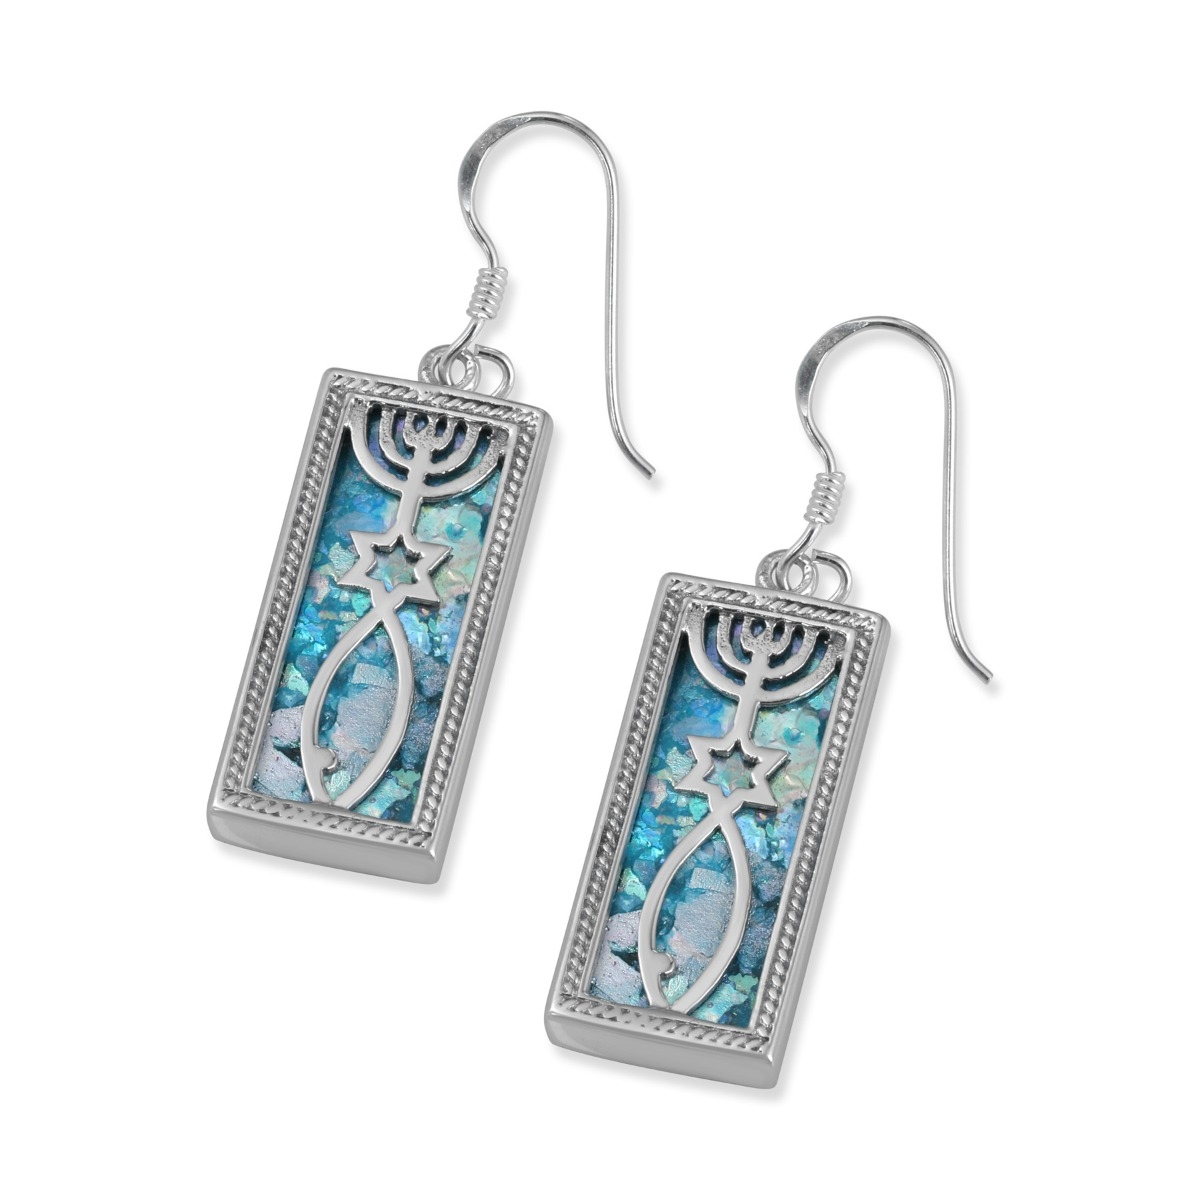 Noa Studios Sterling Silver and Roman Glass Filigree Rectangle Grafted-In Earrings - 1